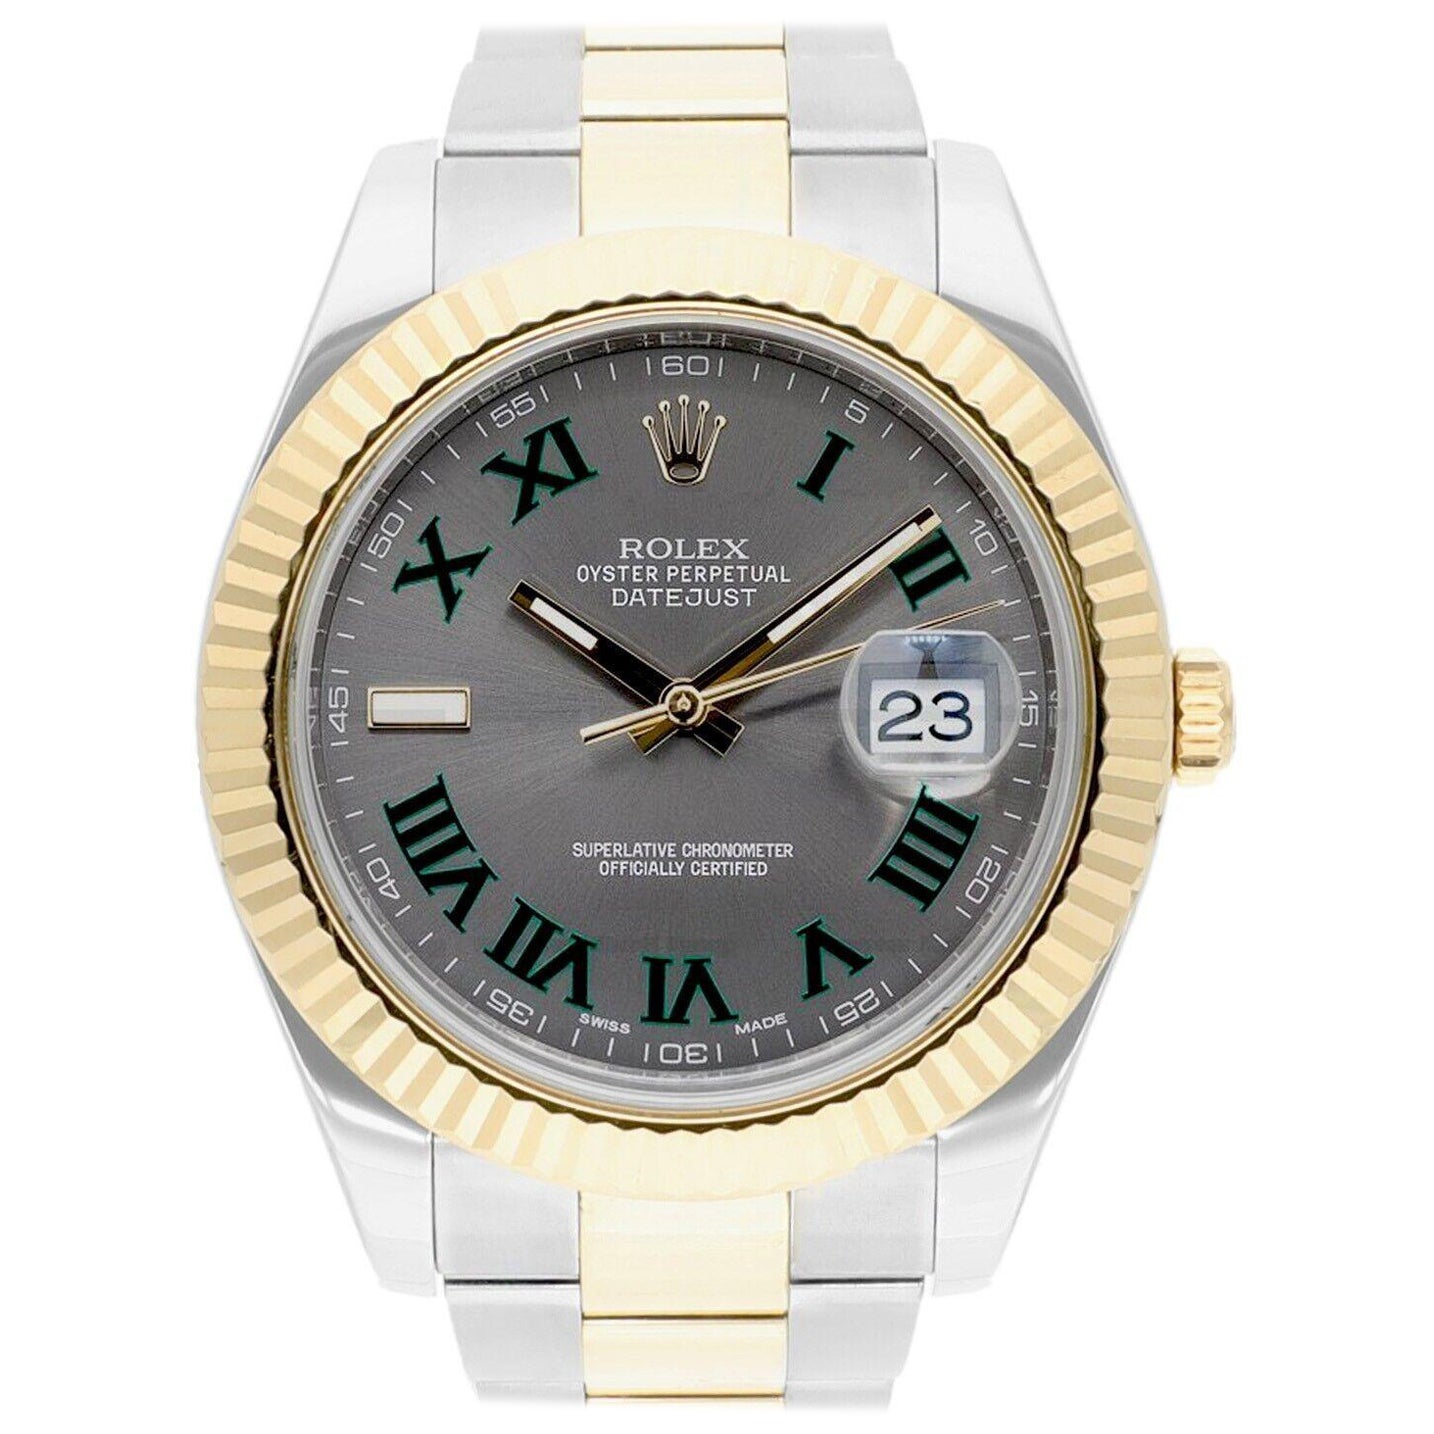 Rolex Datejust II 41mm 116333 Wimbledon Dial Two Tone Oyster With Papers